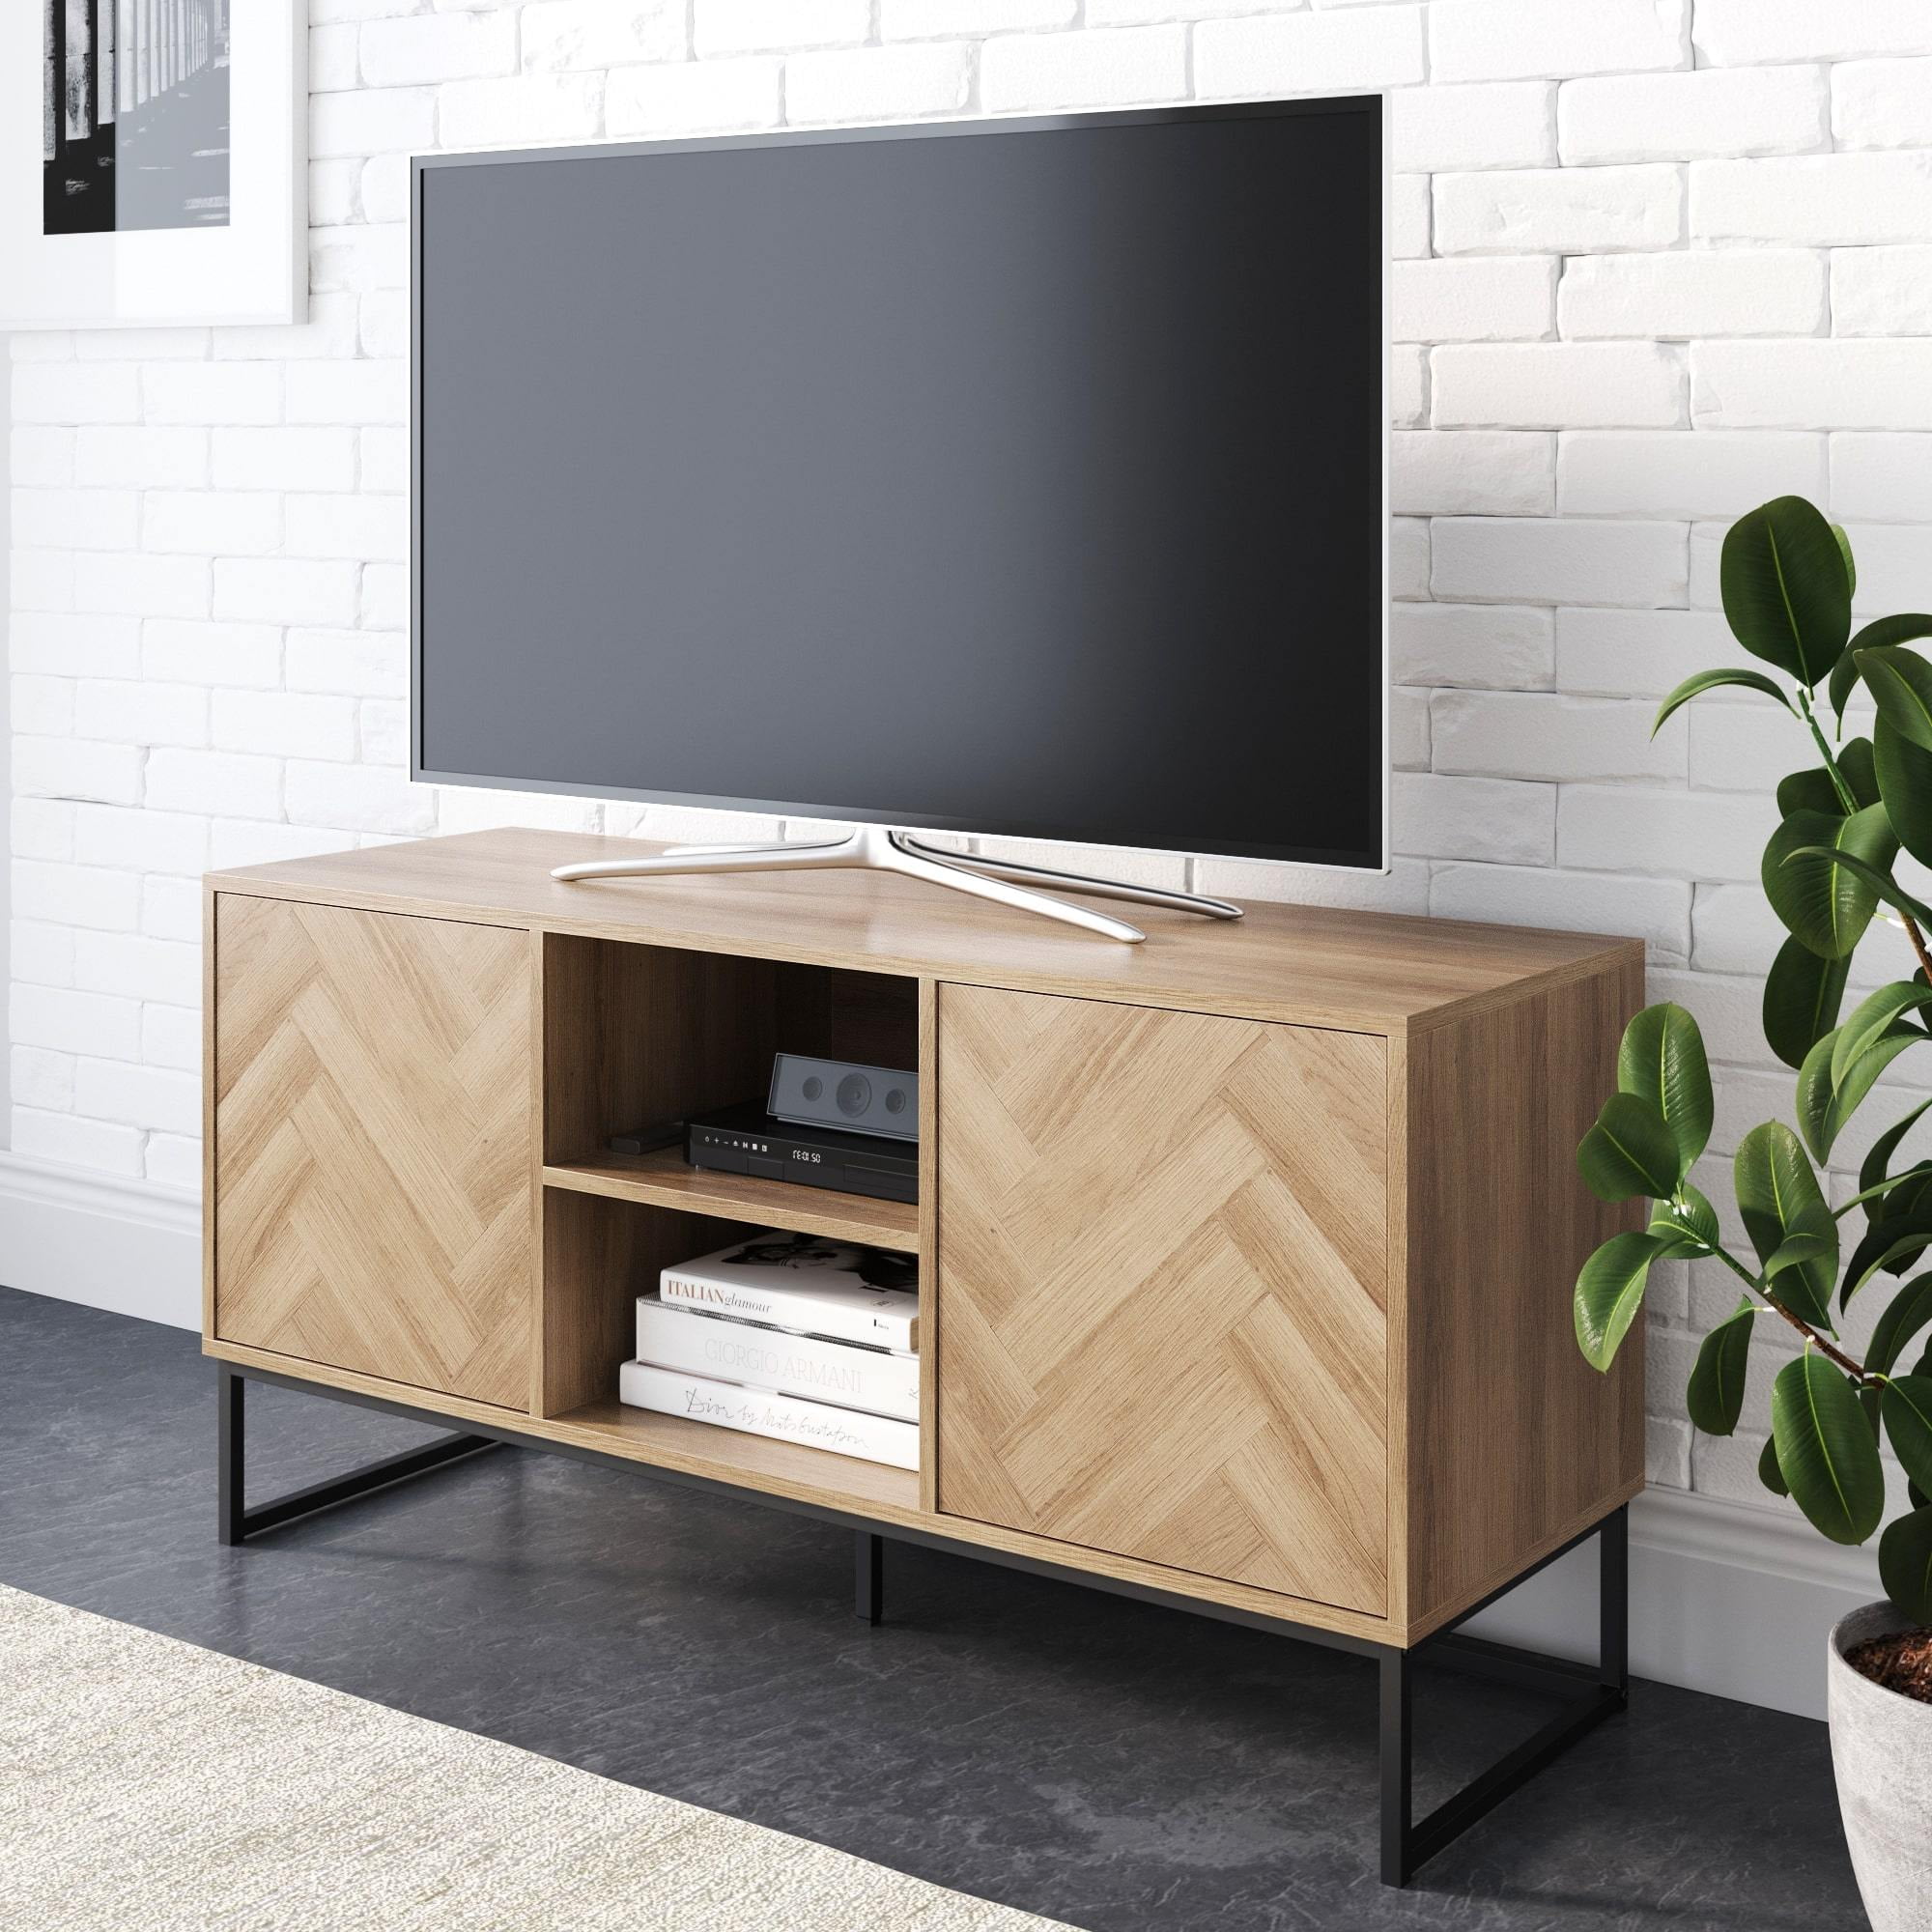 Functional Media Consoles With Ample Storage